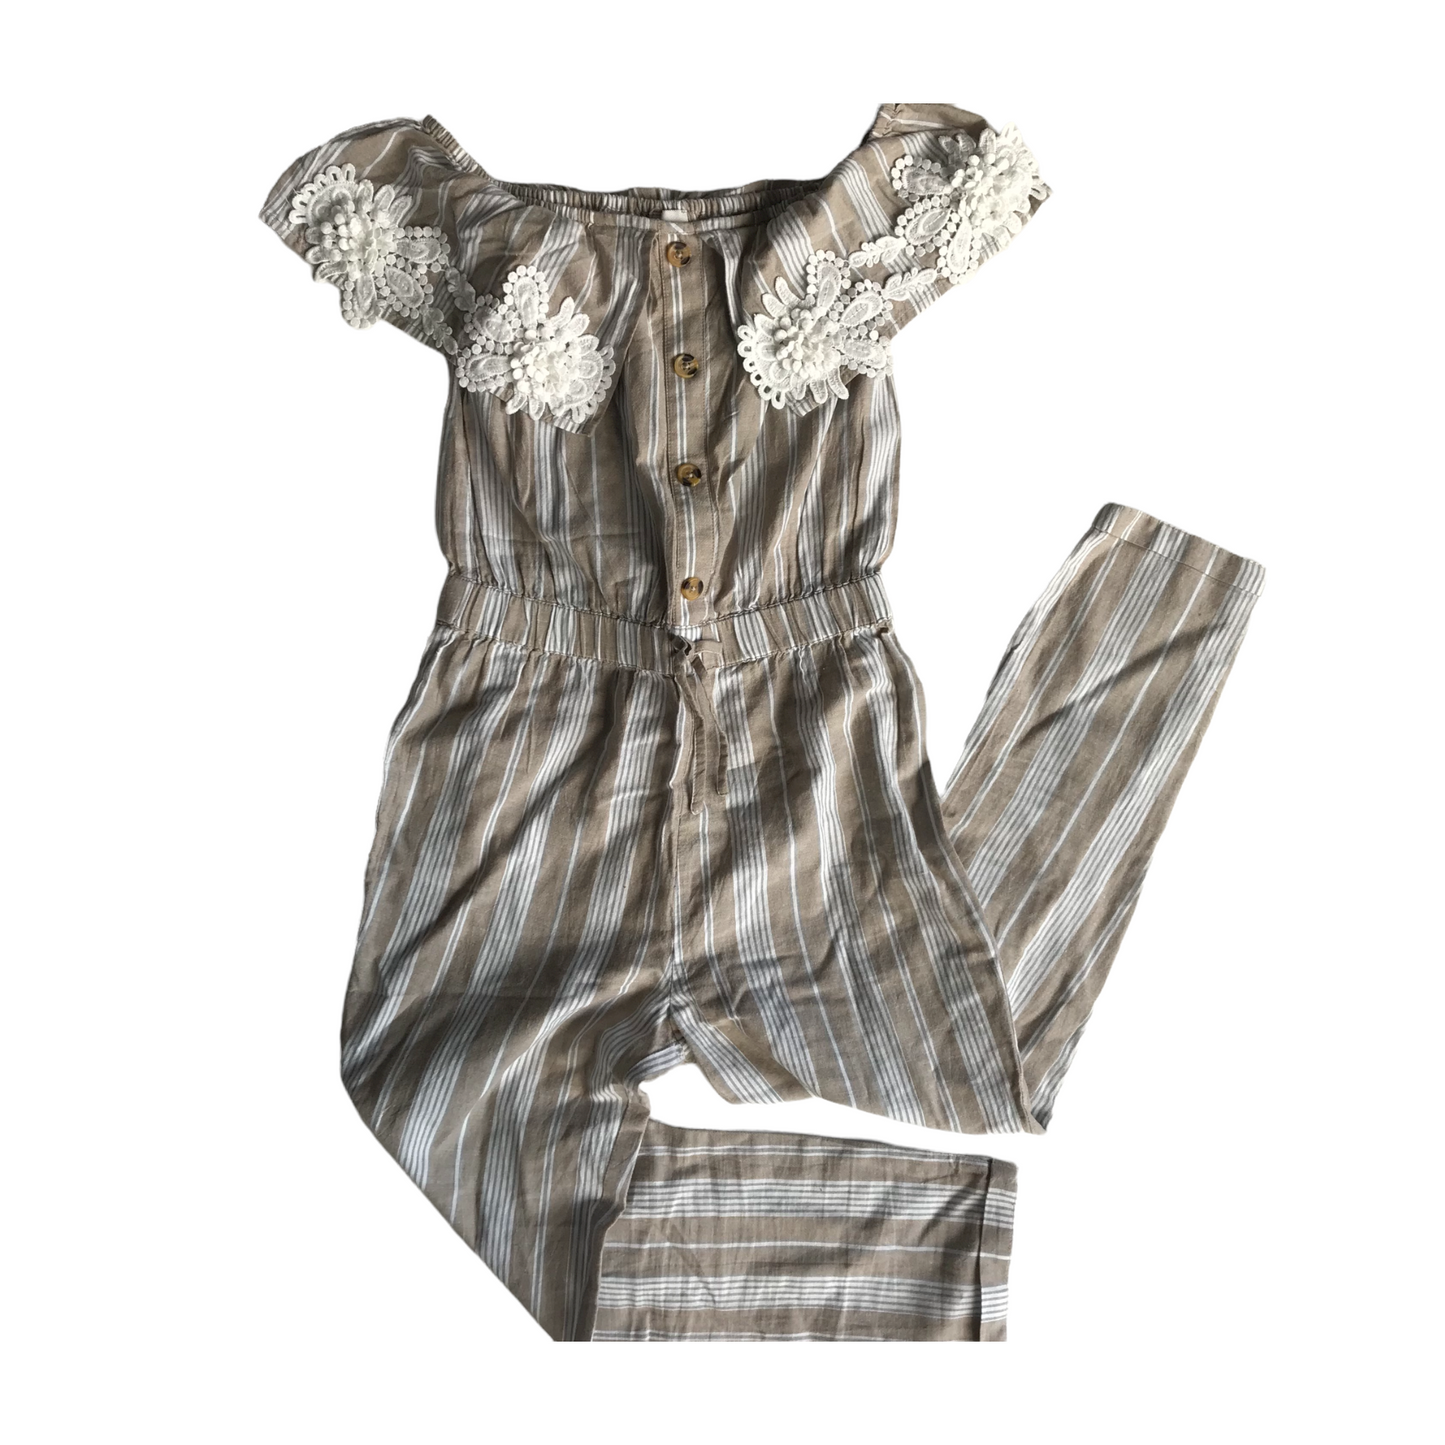 Jumpsuit - Stripy with Lace Frill Neckline - Age 10